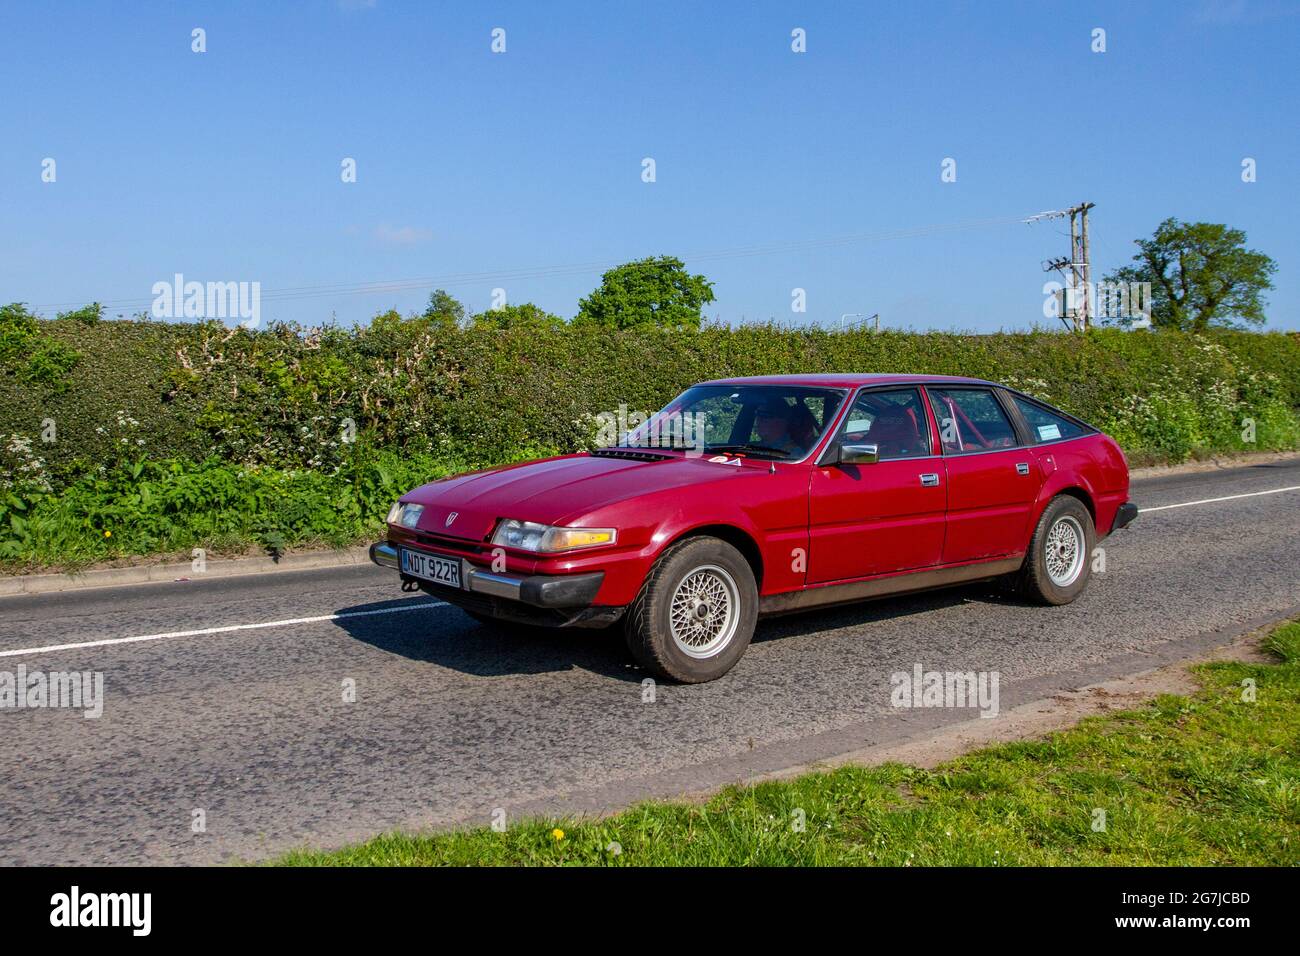 1976 70s red Rover  3500 SD1, 3528cc petrol 4dr british saloon car en-route to Capesthorne Hall classic May car show, Cheshire, UK Stock Photo